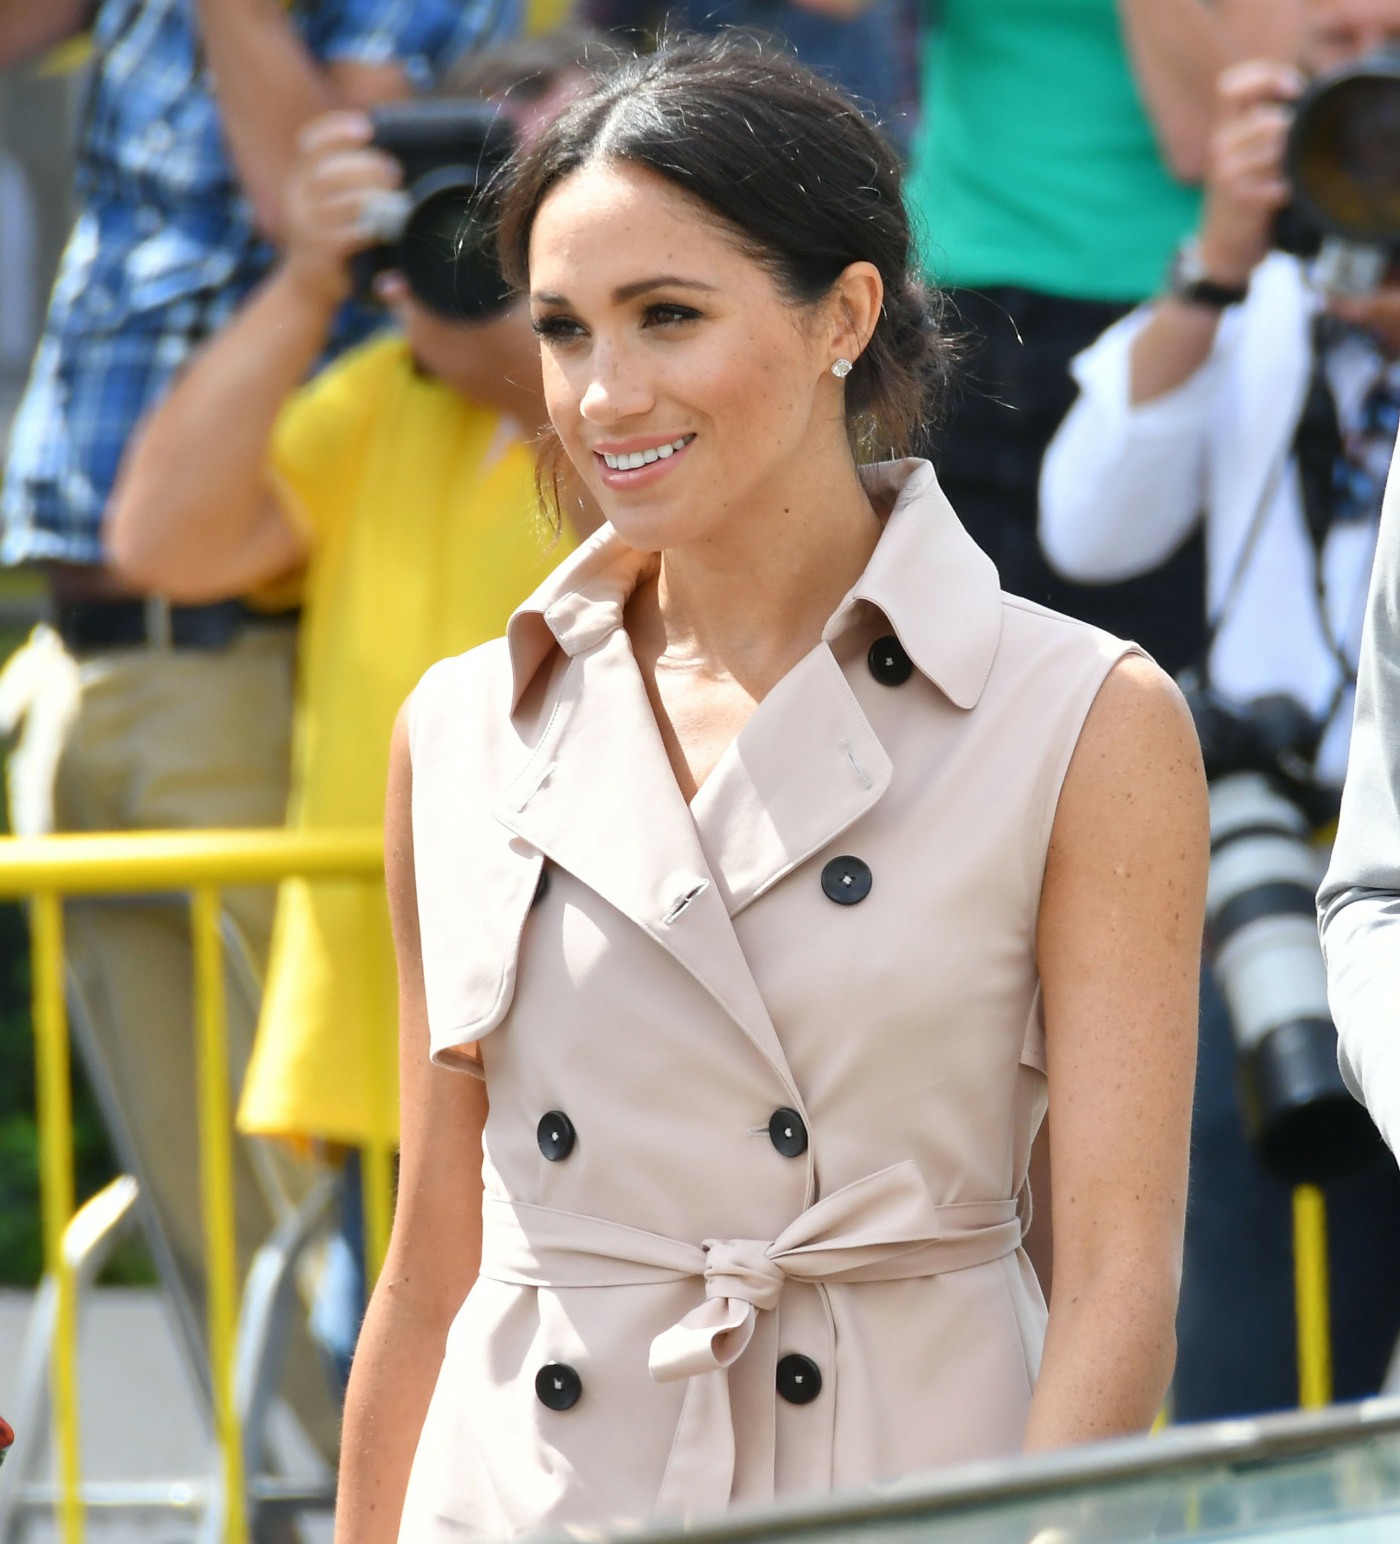 Meghan, Duchess of Sussex, wears a pale pink trench dress by House of Nonie as she visits the Nelson Mandela Centenary Exhibition at the Southbank Centre's Queen Elizabeth Hall in London with husband Prince Harry, Duke of Sussex